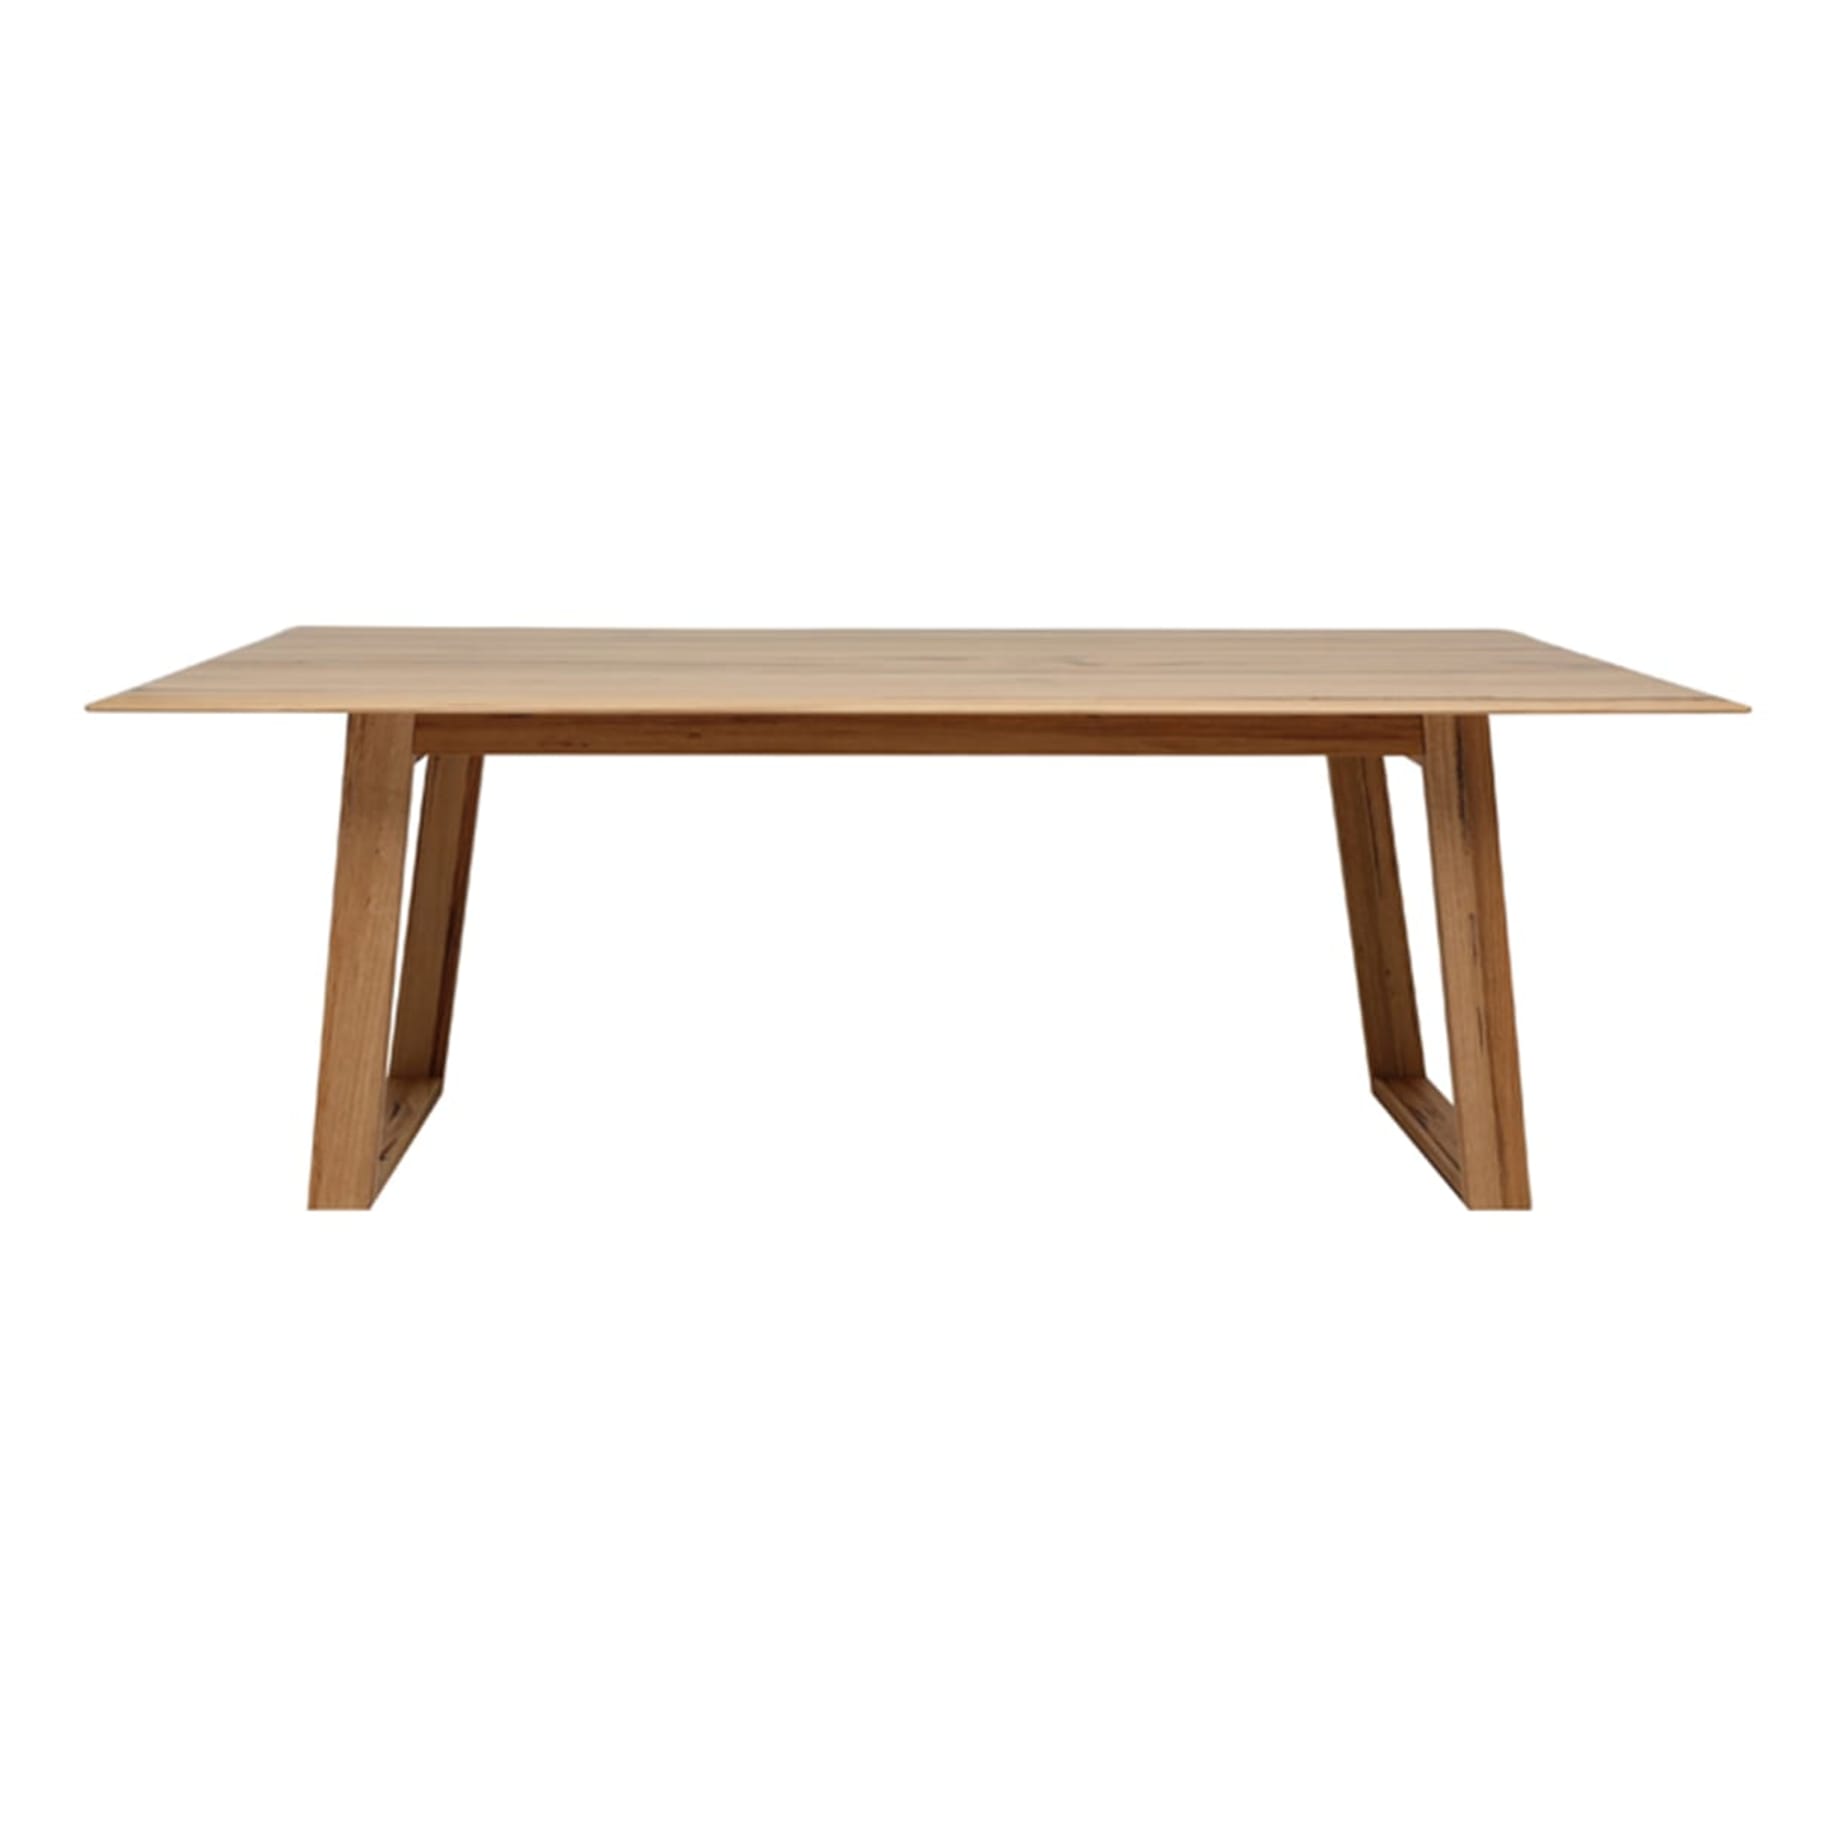 Baxter Dining Table 240cm in Australian Messmate